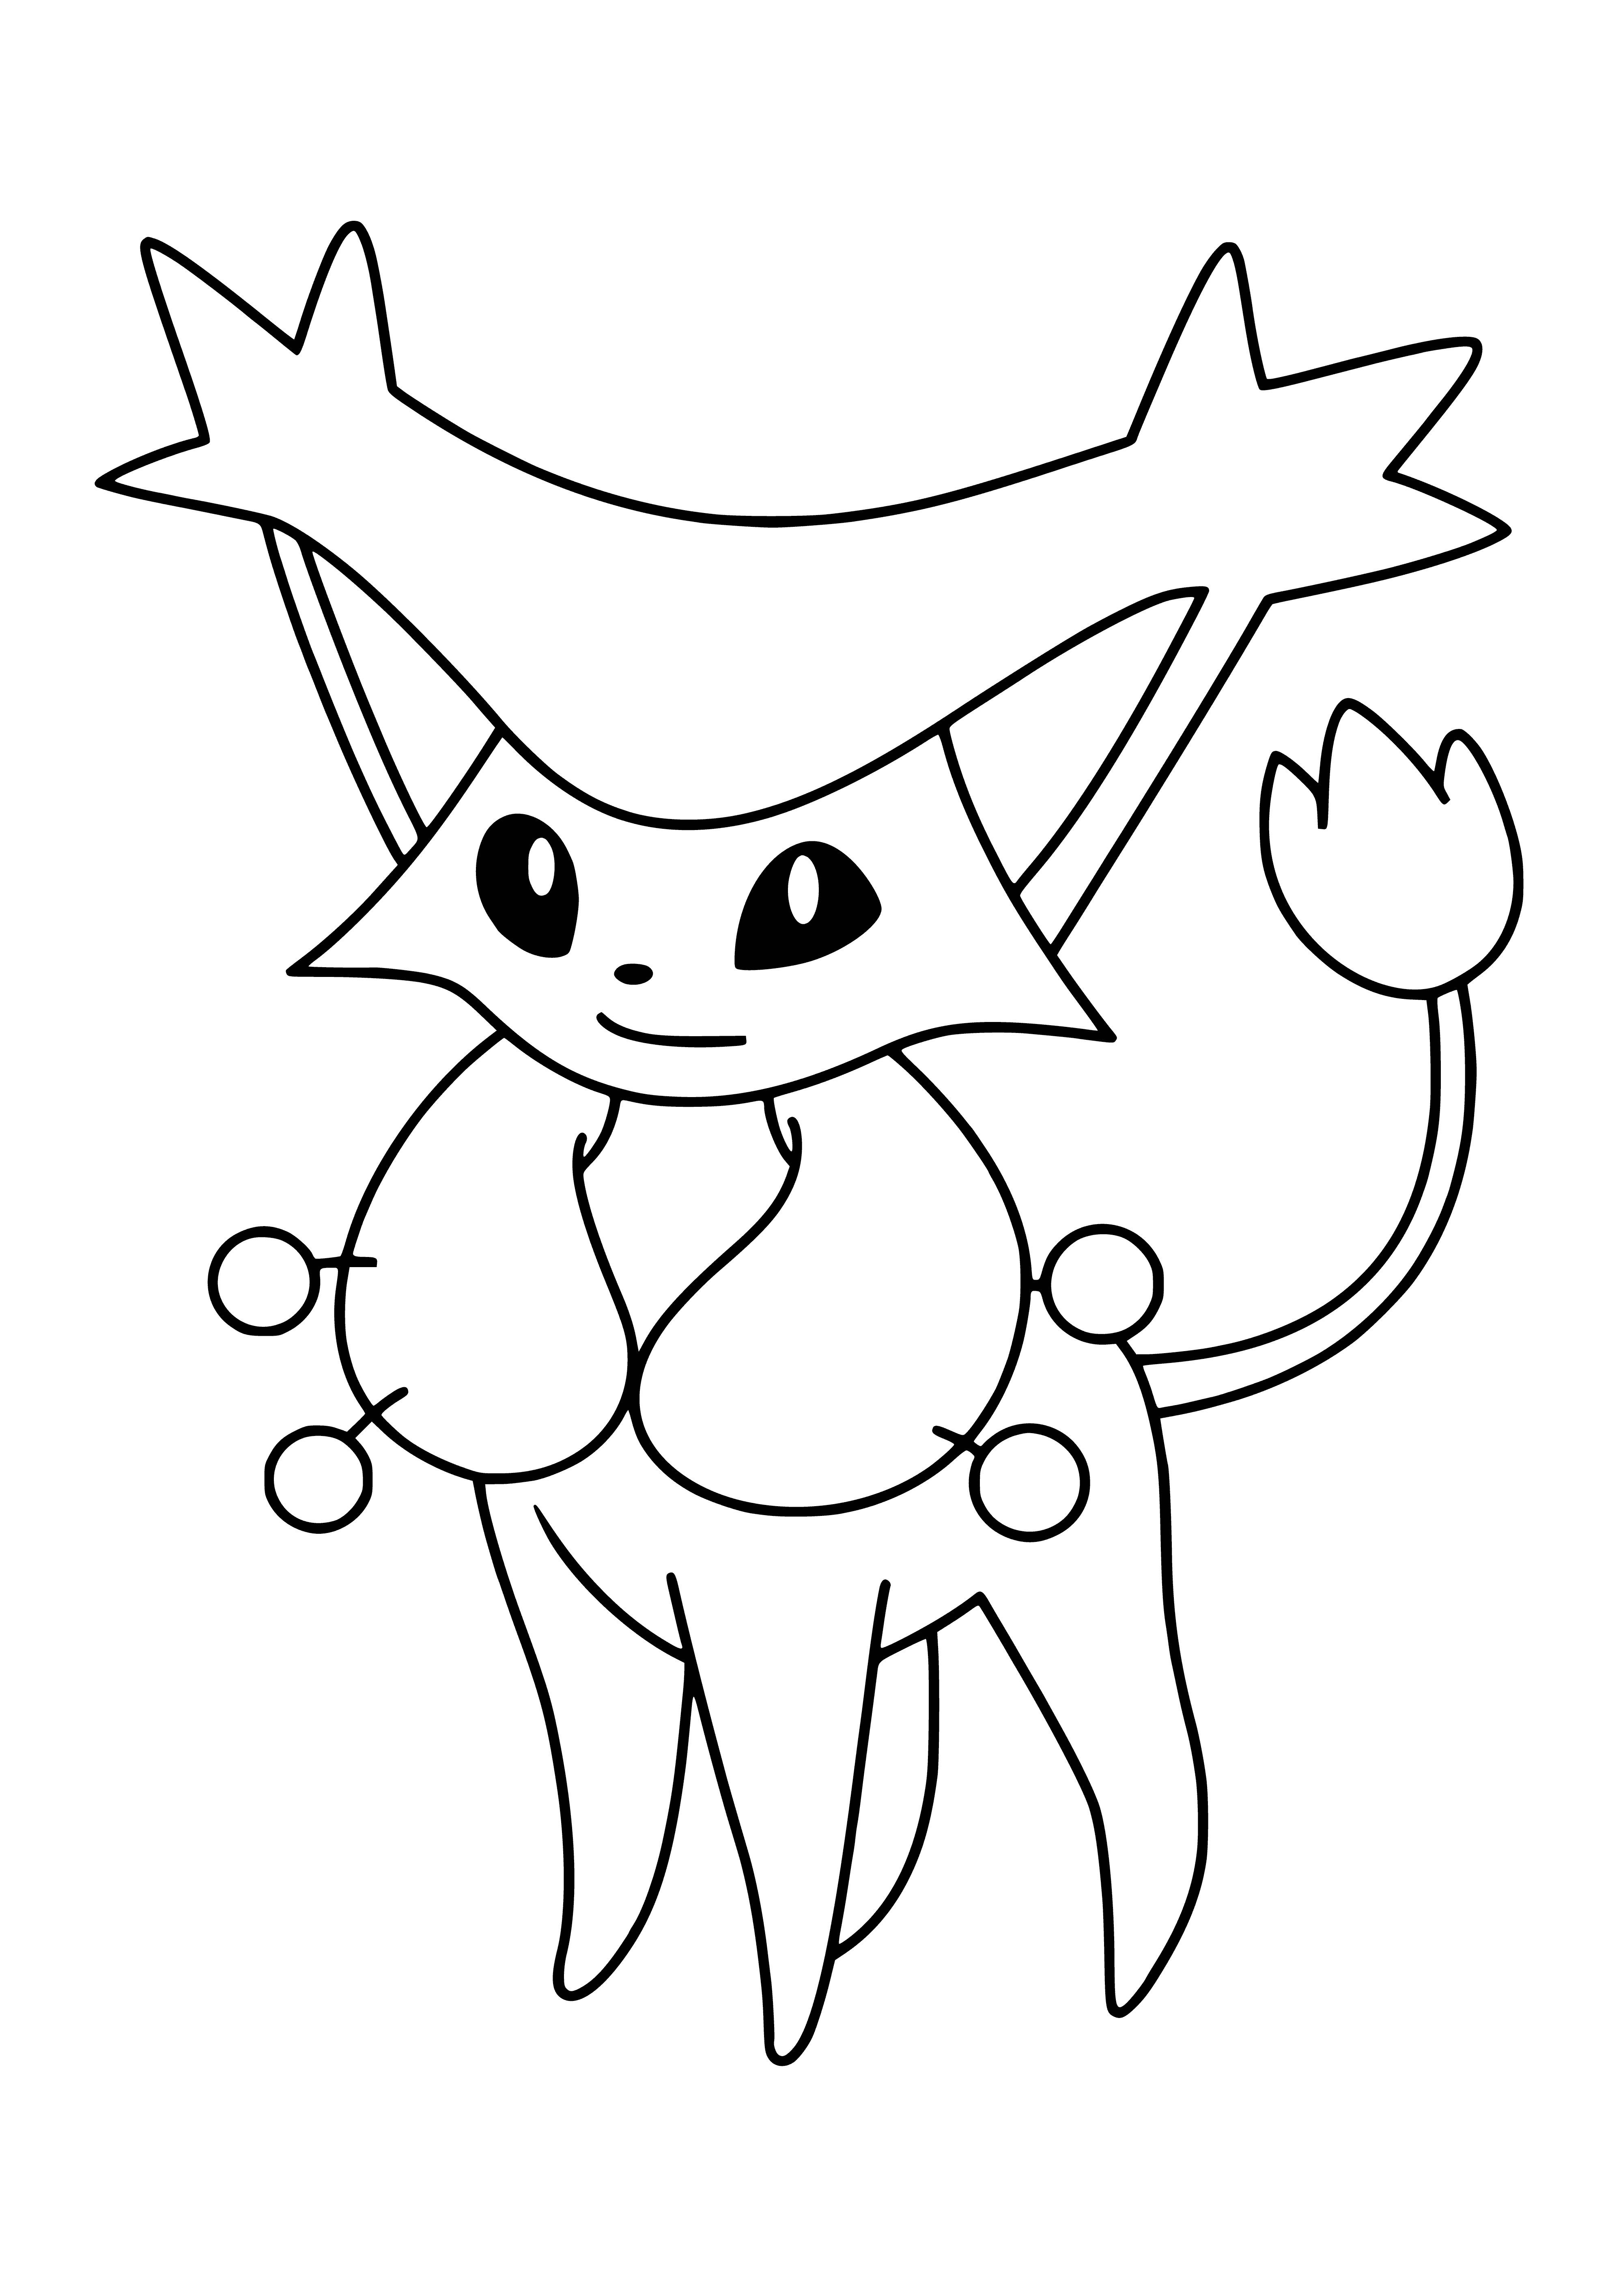 coloring page: Cute yellow Pokémon with green eyes, white chest and belly with spots, and big ears and tail.